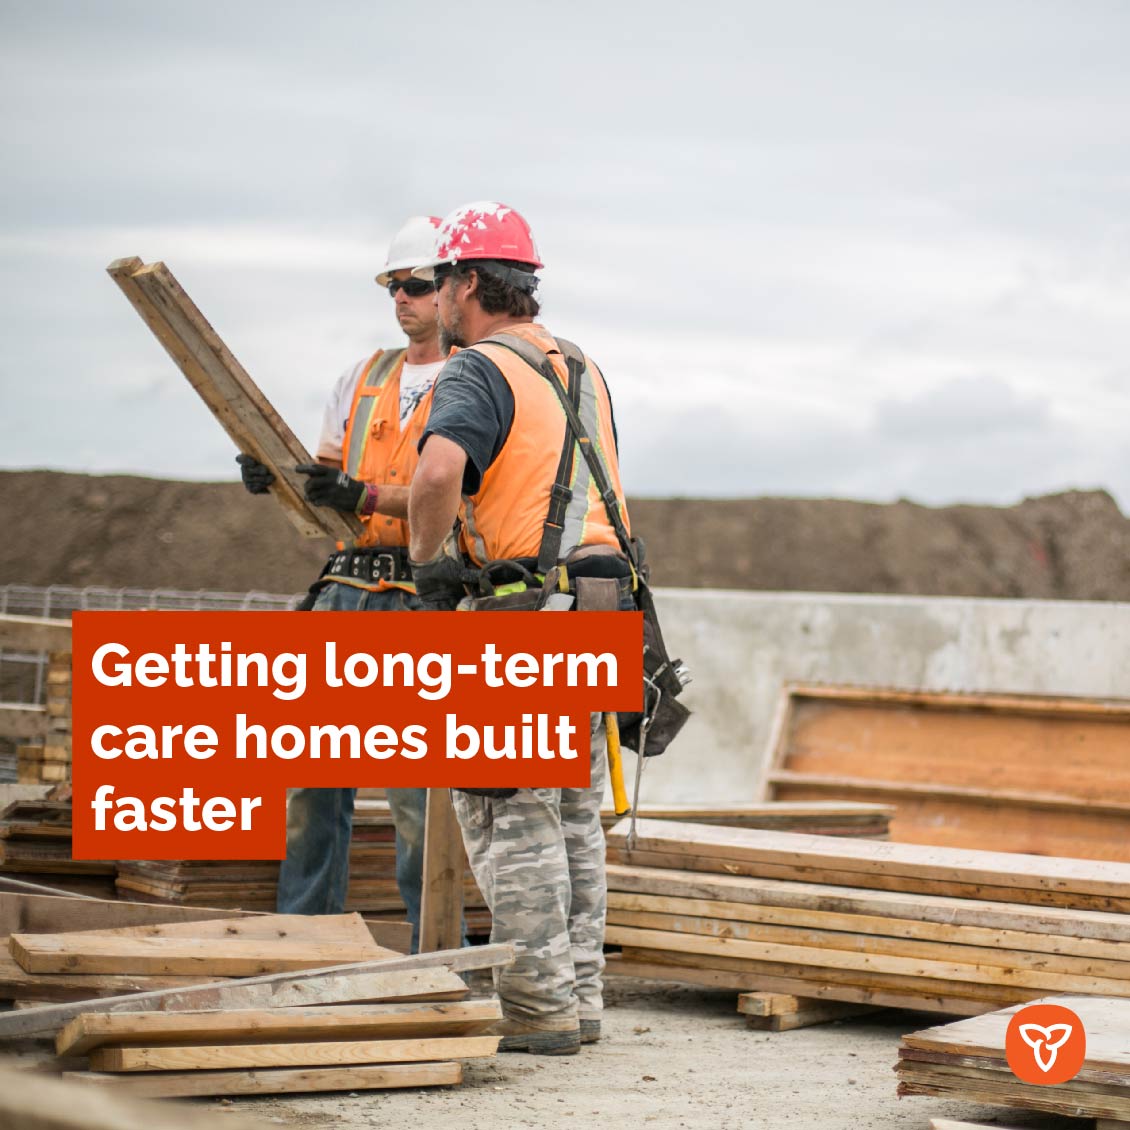 Ontario is investing more than $155 million this year in its successful Construction Funding Subsidy that helps get shovels in the ground faster for new and redeveloped long-term care homes across the province. news.ontario.ca/en/release/100…